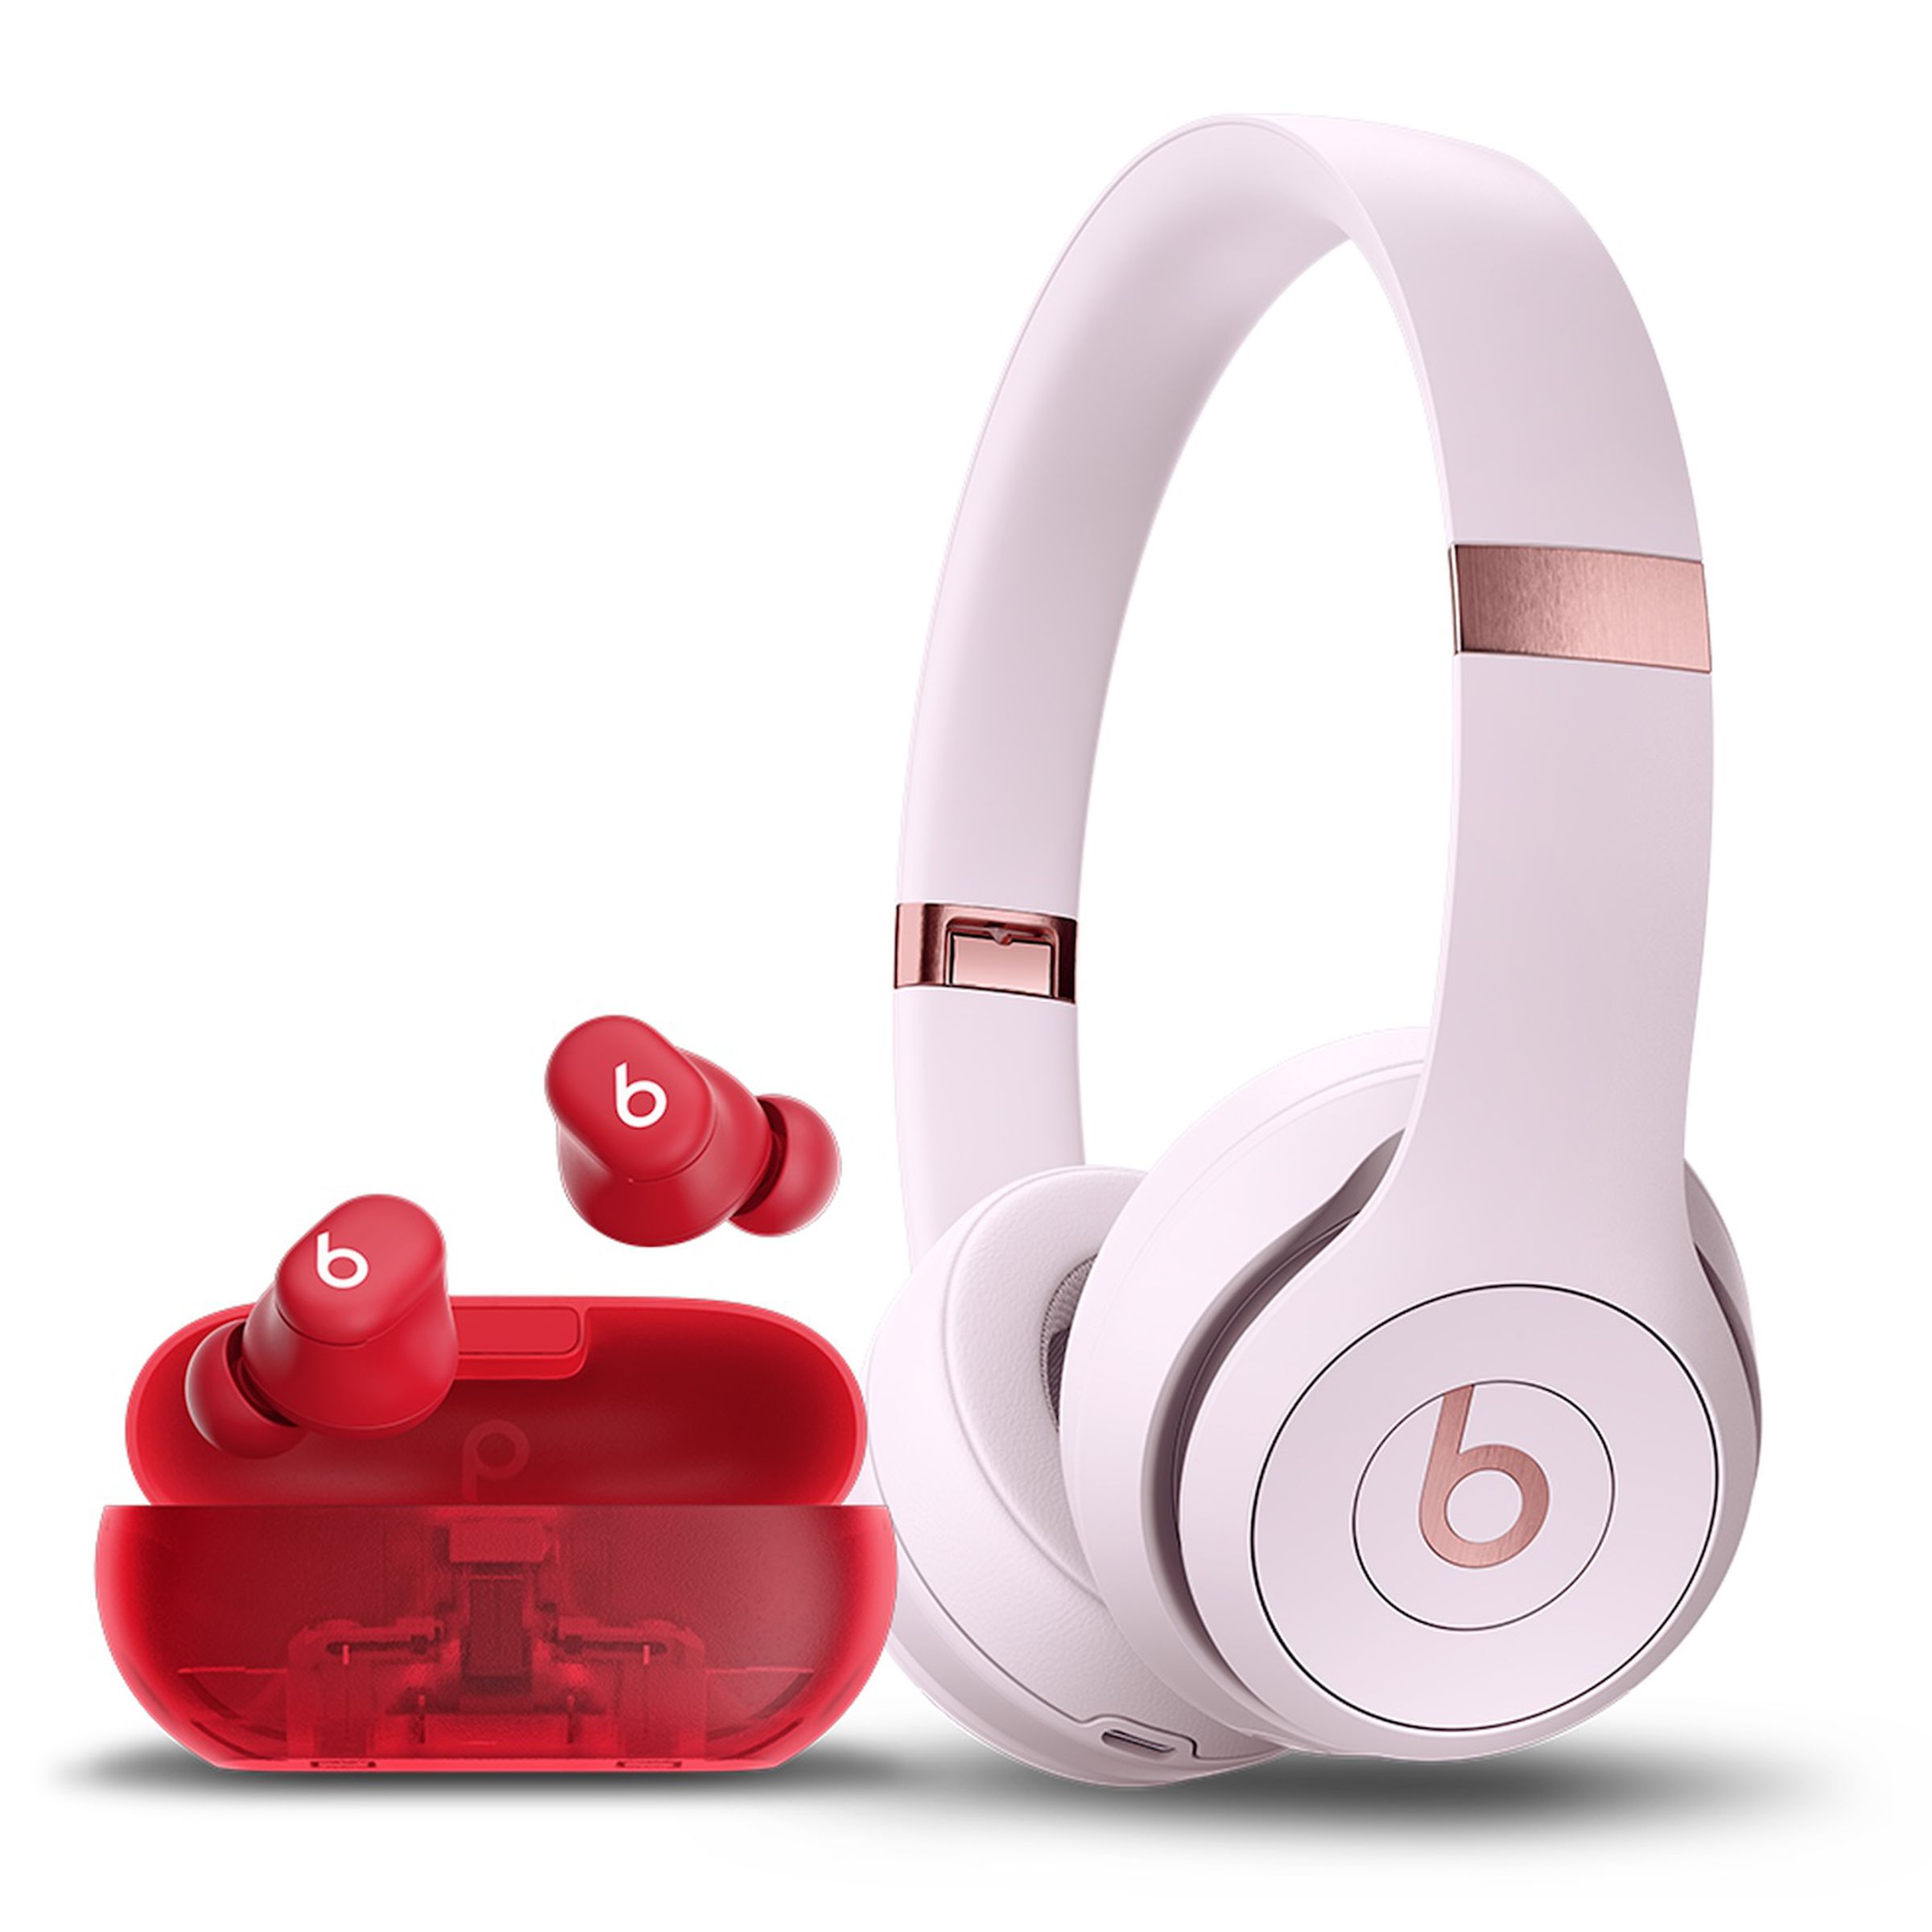 A marketing image of the Beats Solo Buds and Solo 4 headphones.